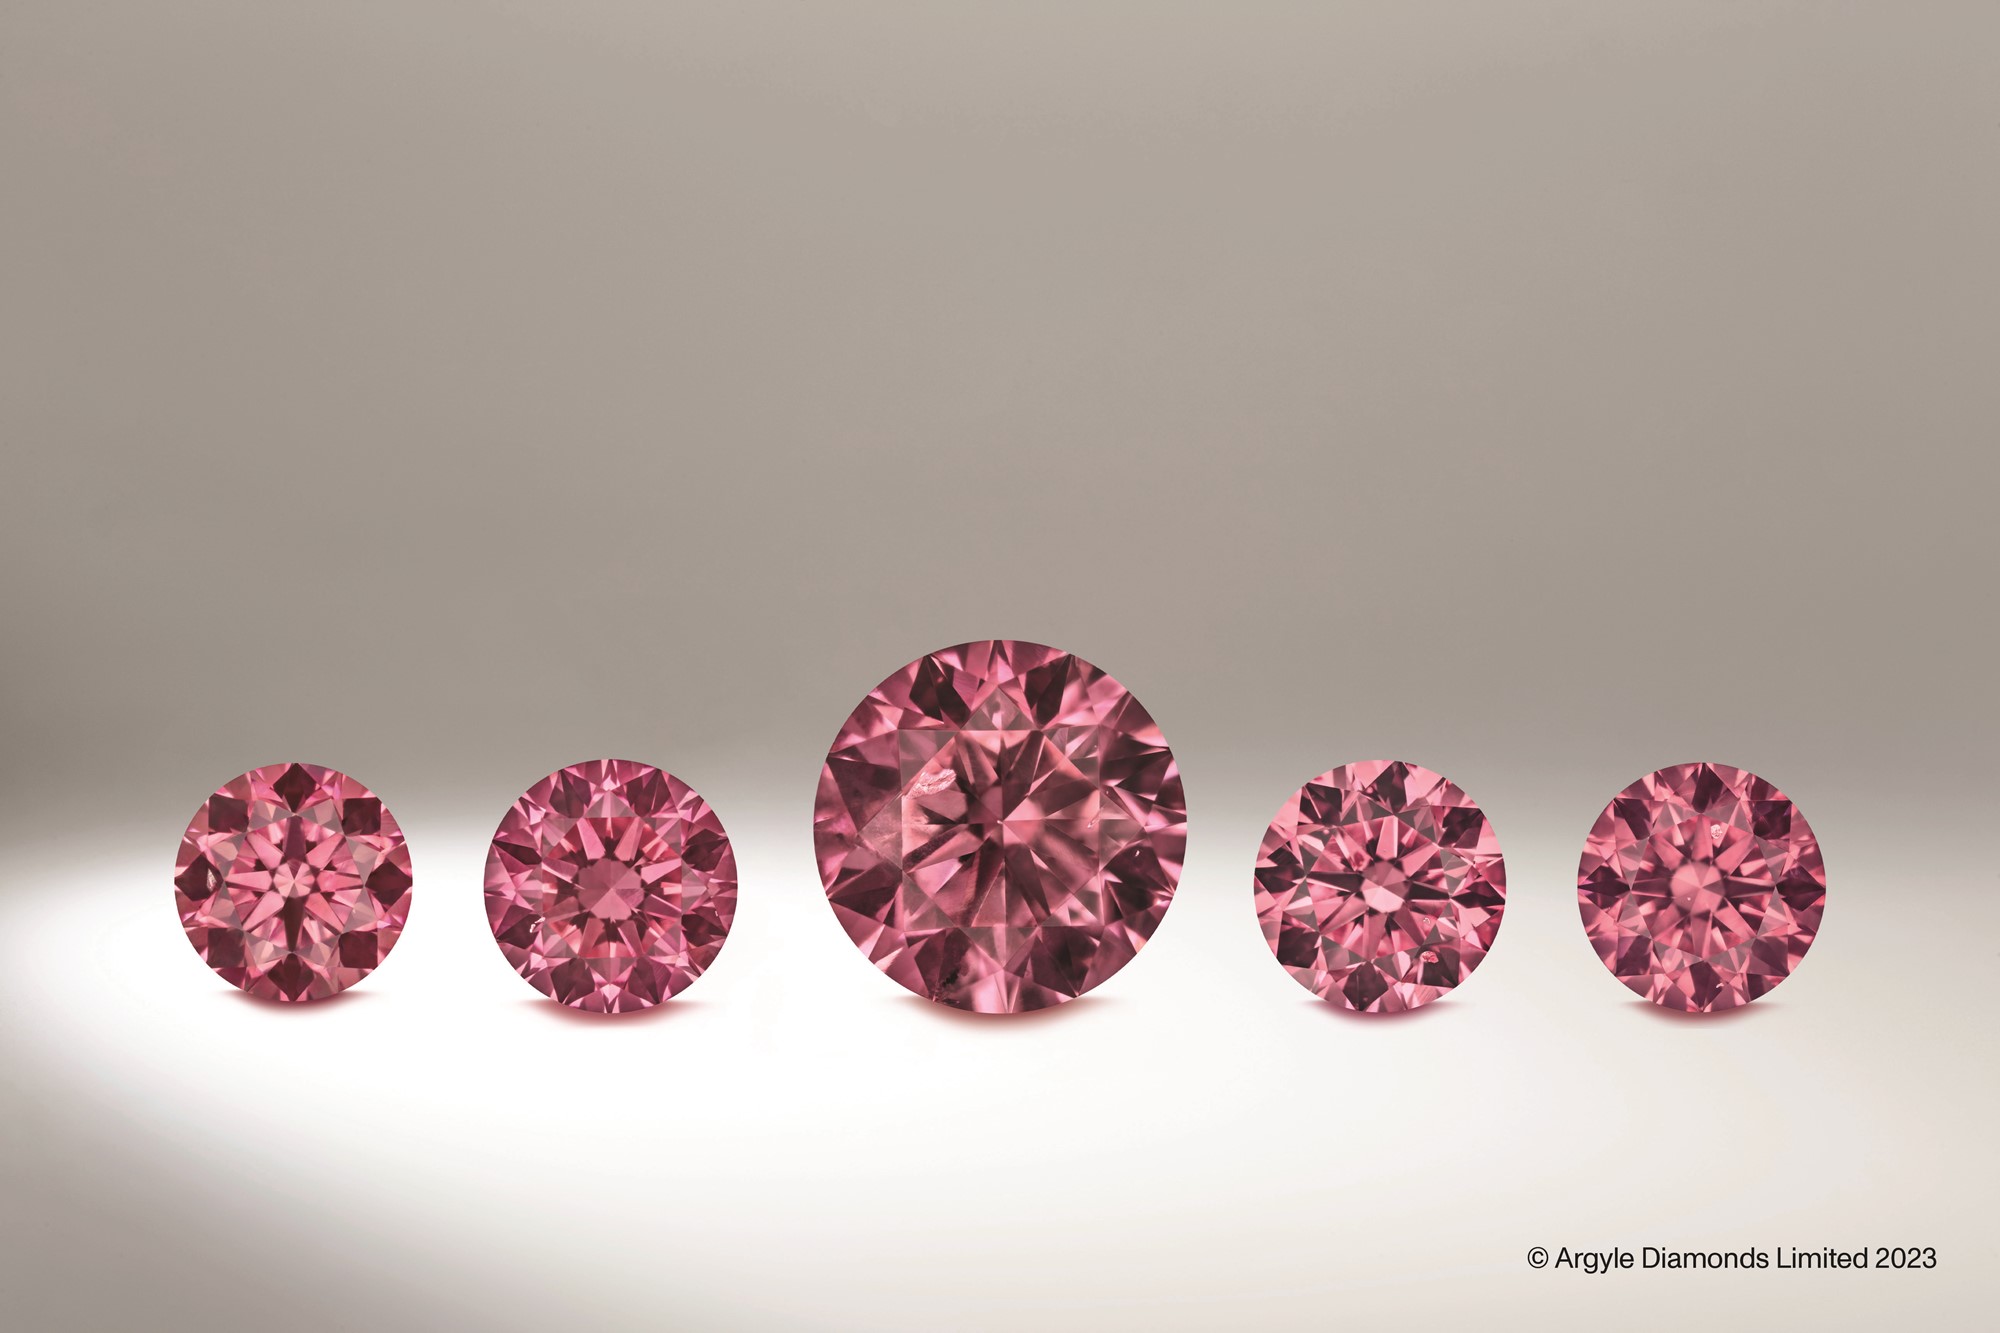 Five round pink diamonds in a row, the middle one is the biggest.